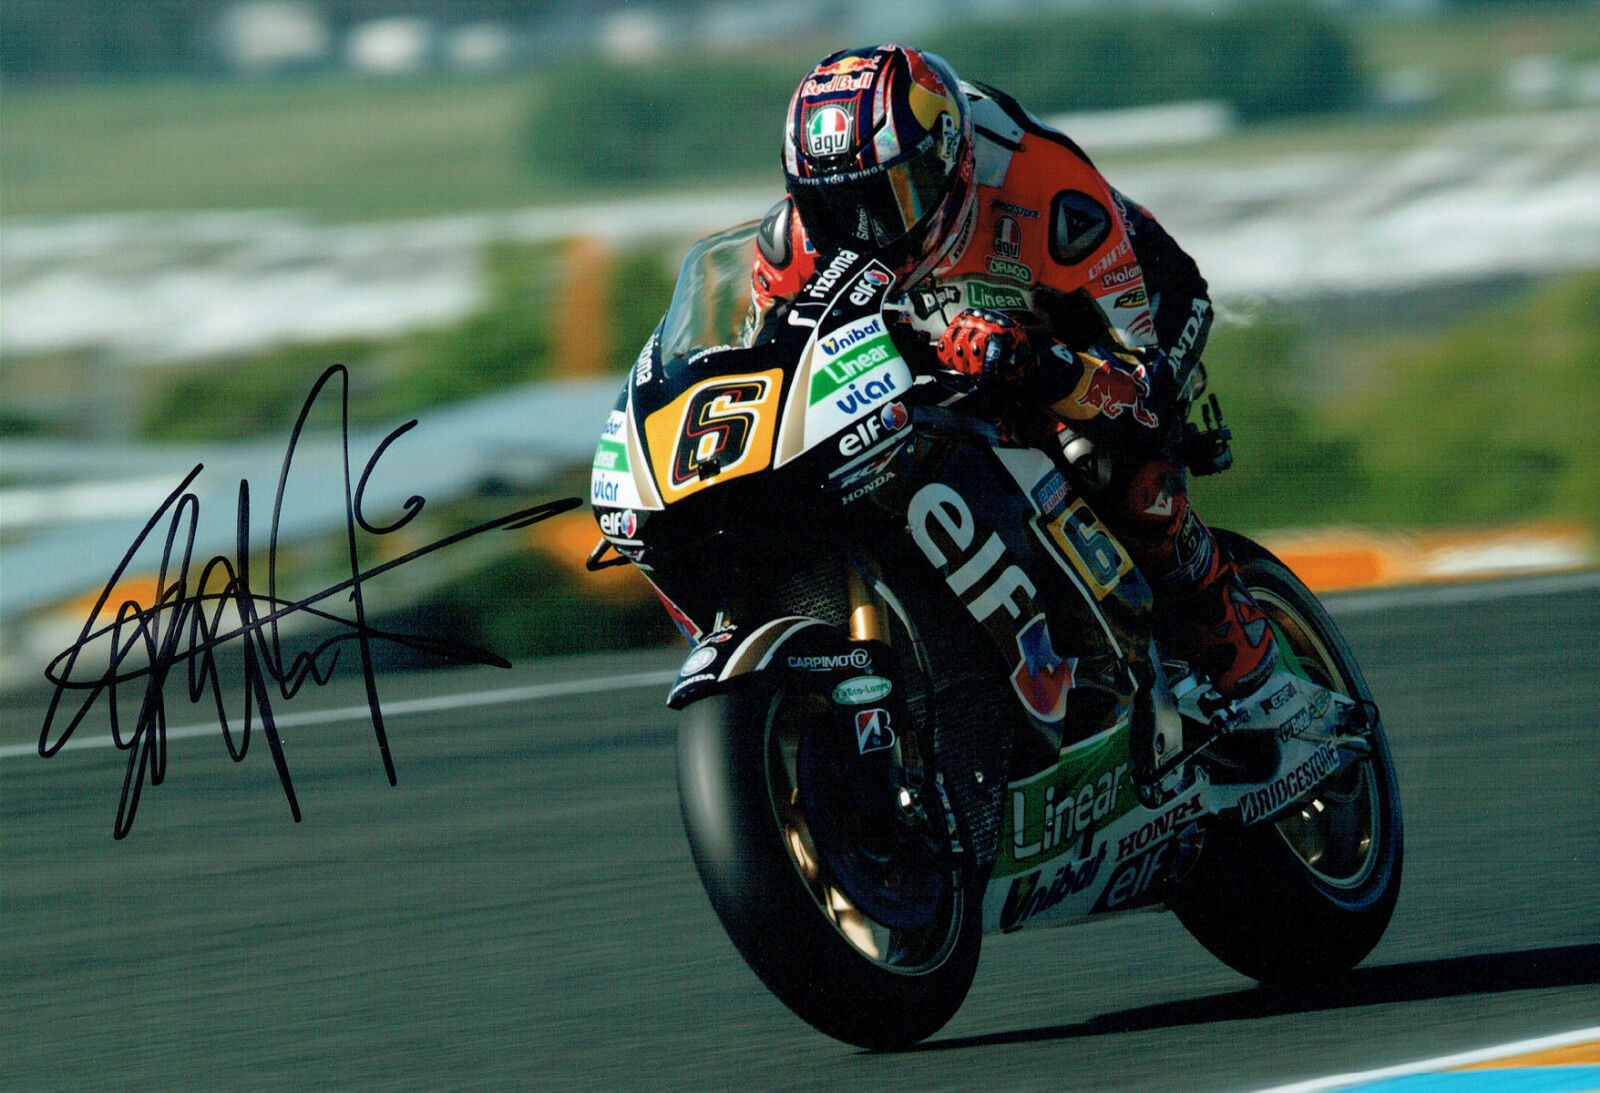 SIGNED Stefan BRADL 12x8 Photo Poster painting MOTO GP Red Bull RARE Autograph AFTAL COA